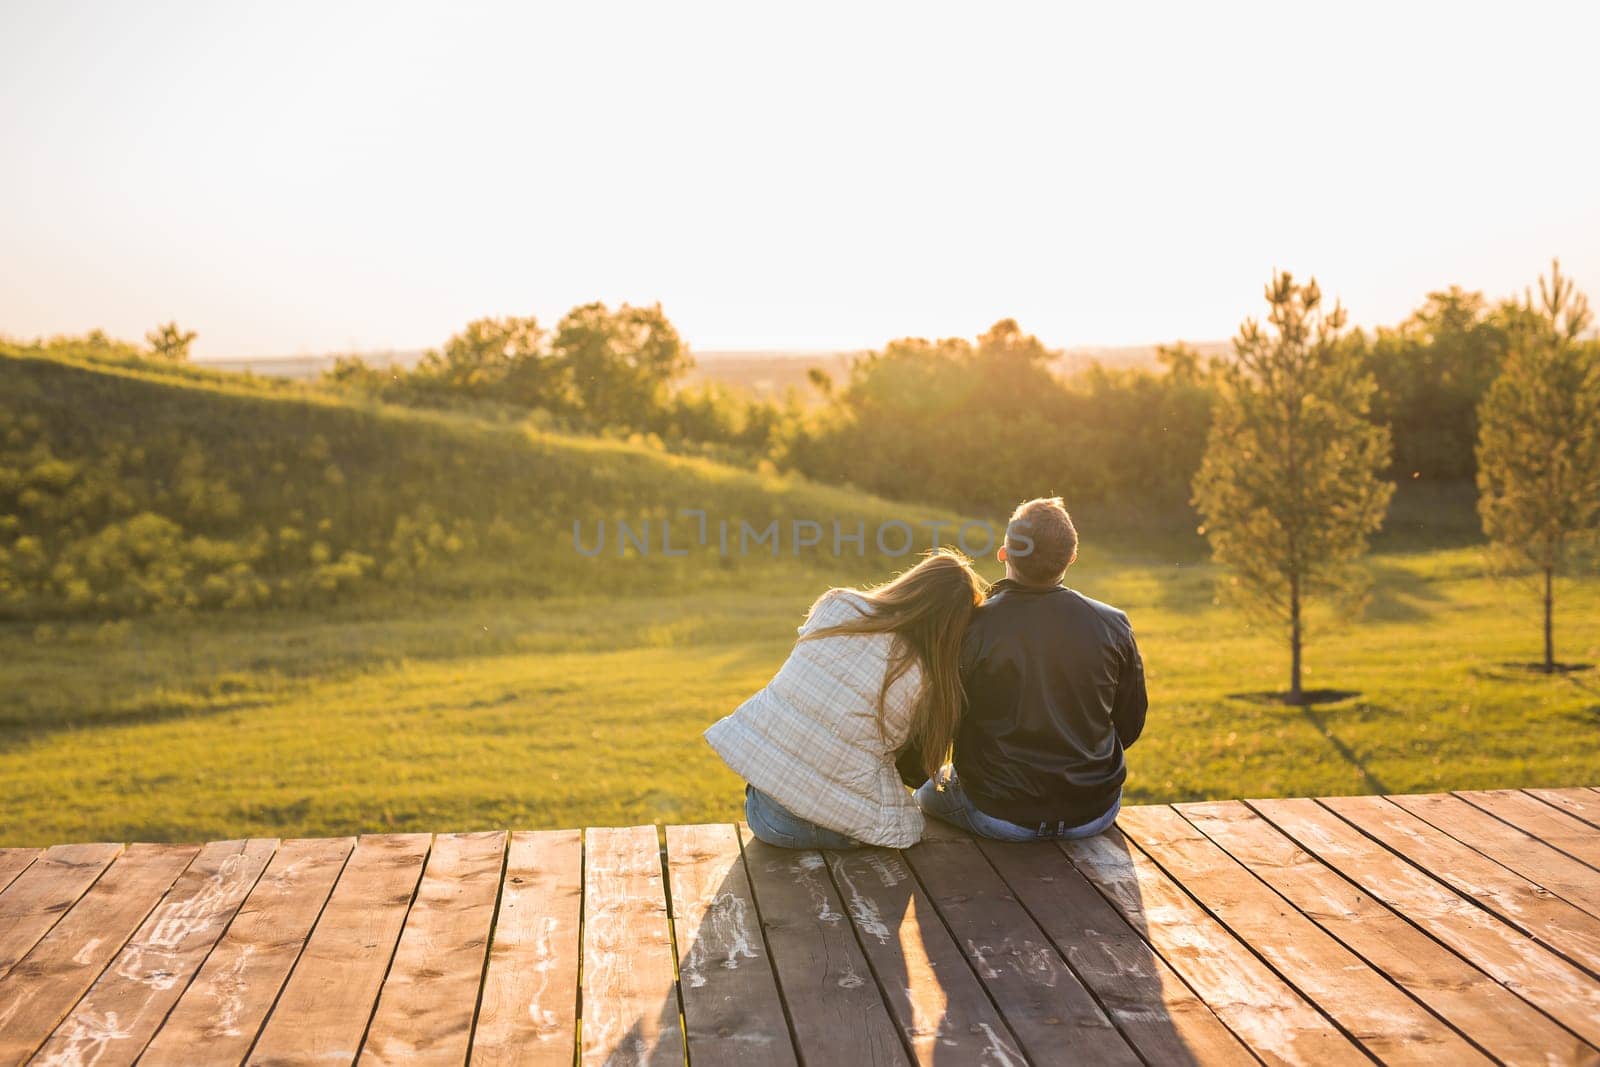 Romantic young couple enjoying a date sitting in a close embrace on a park bench overlooking a lake, view from behind